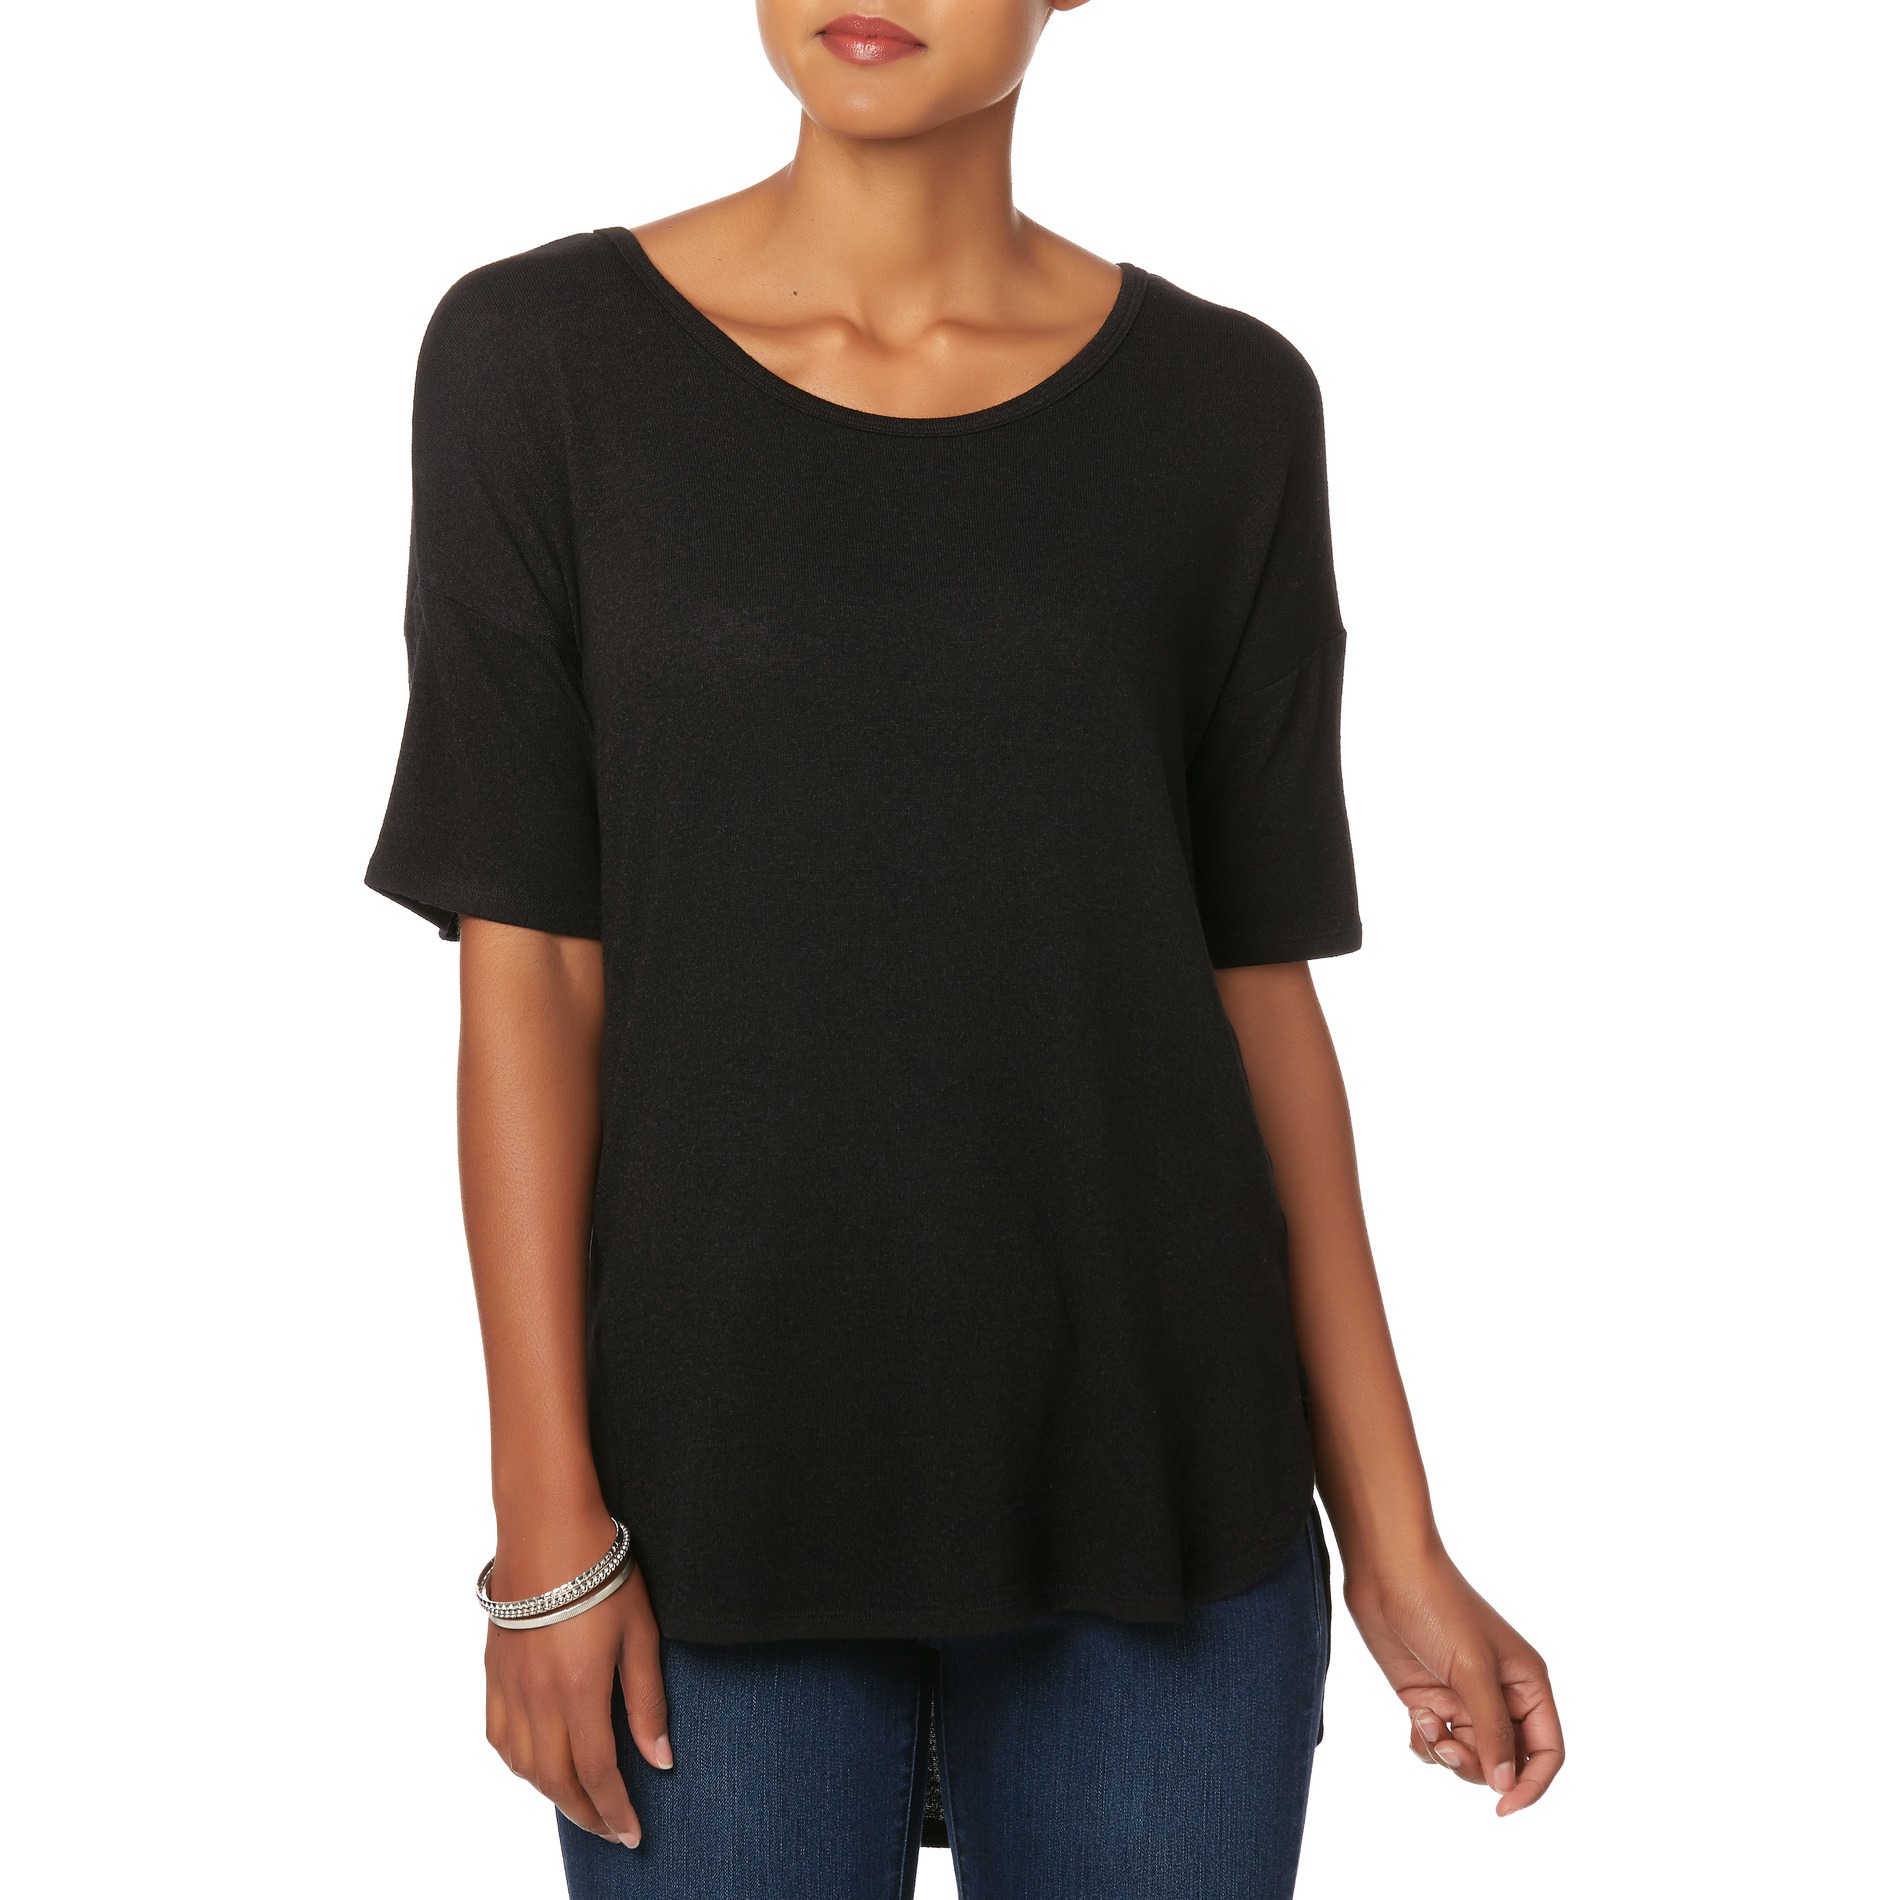 Simply Styled Women's Drop Shoulder Tunic Sweater